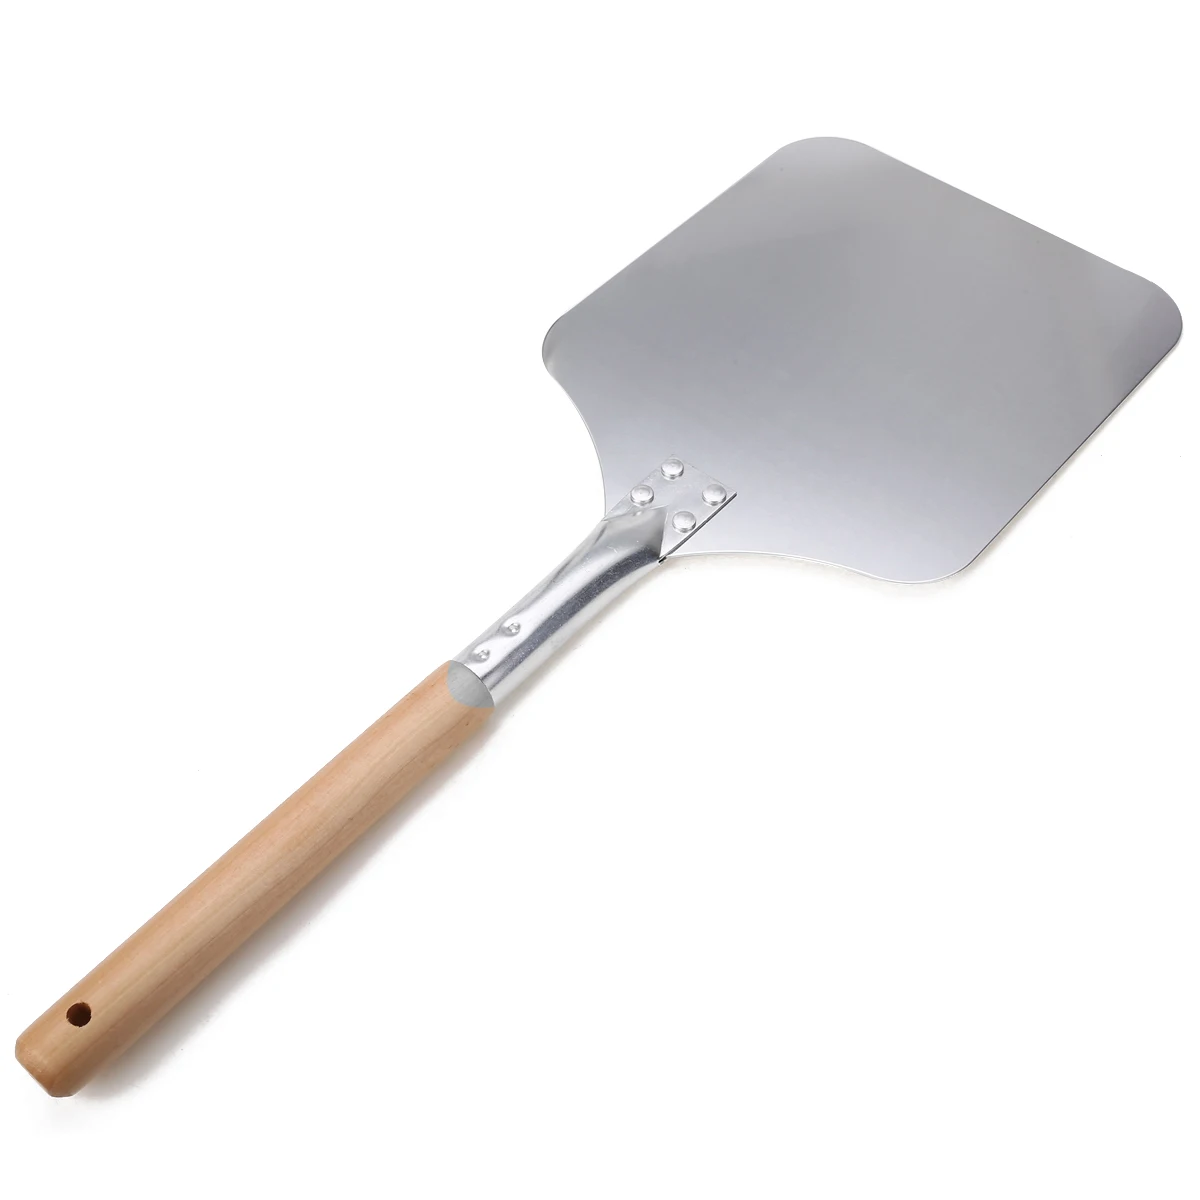 Cake Shovel Baking Tools Stainless Steel Handle Pizza Cheese Peels Lifter 